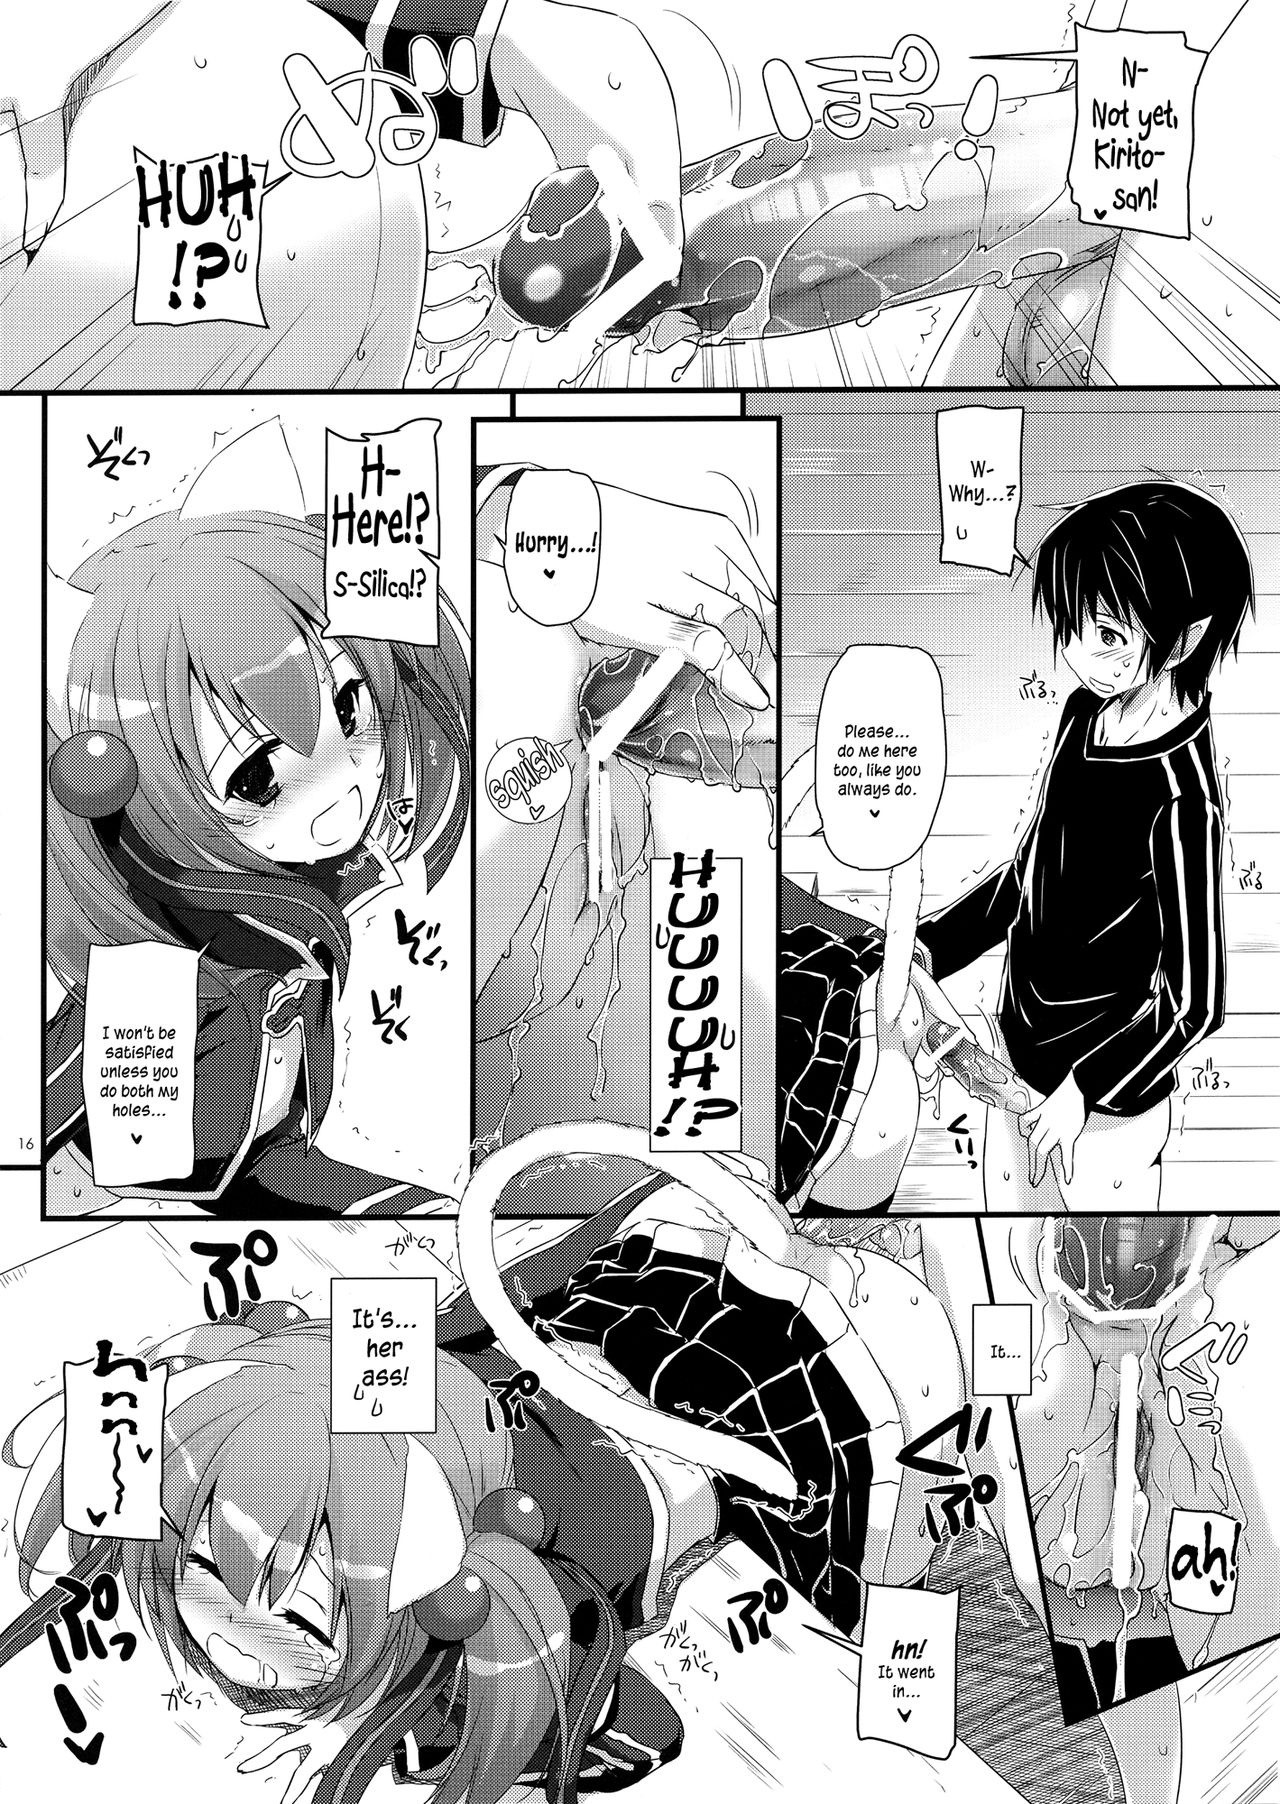 D.L. Action 72 hentai manga picture 15